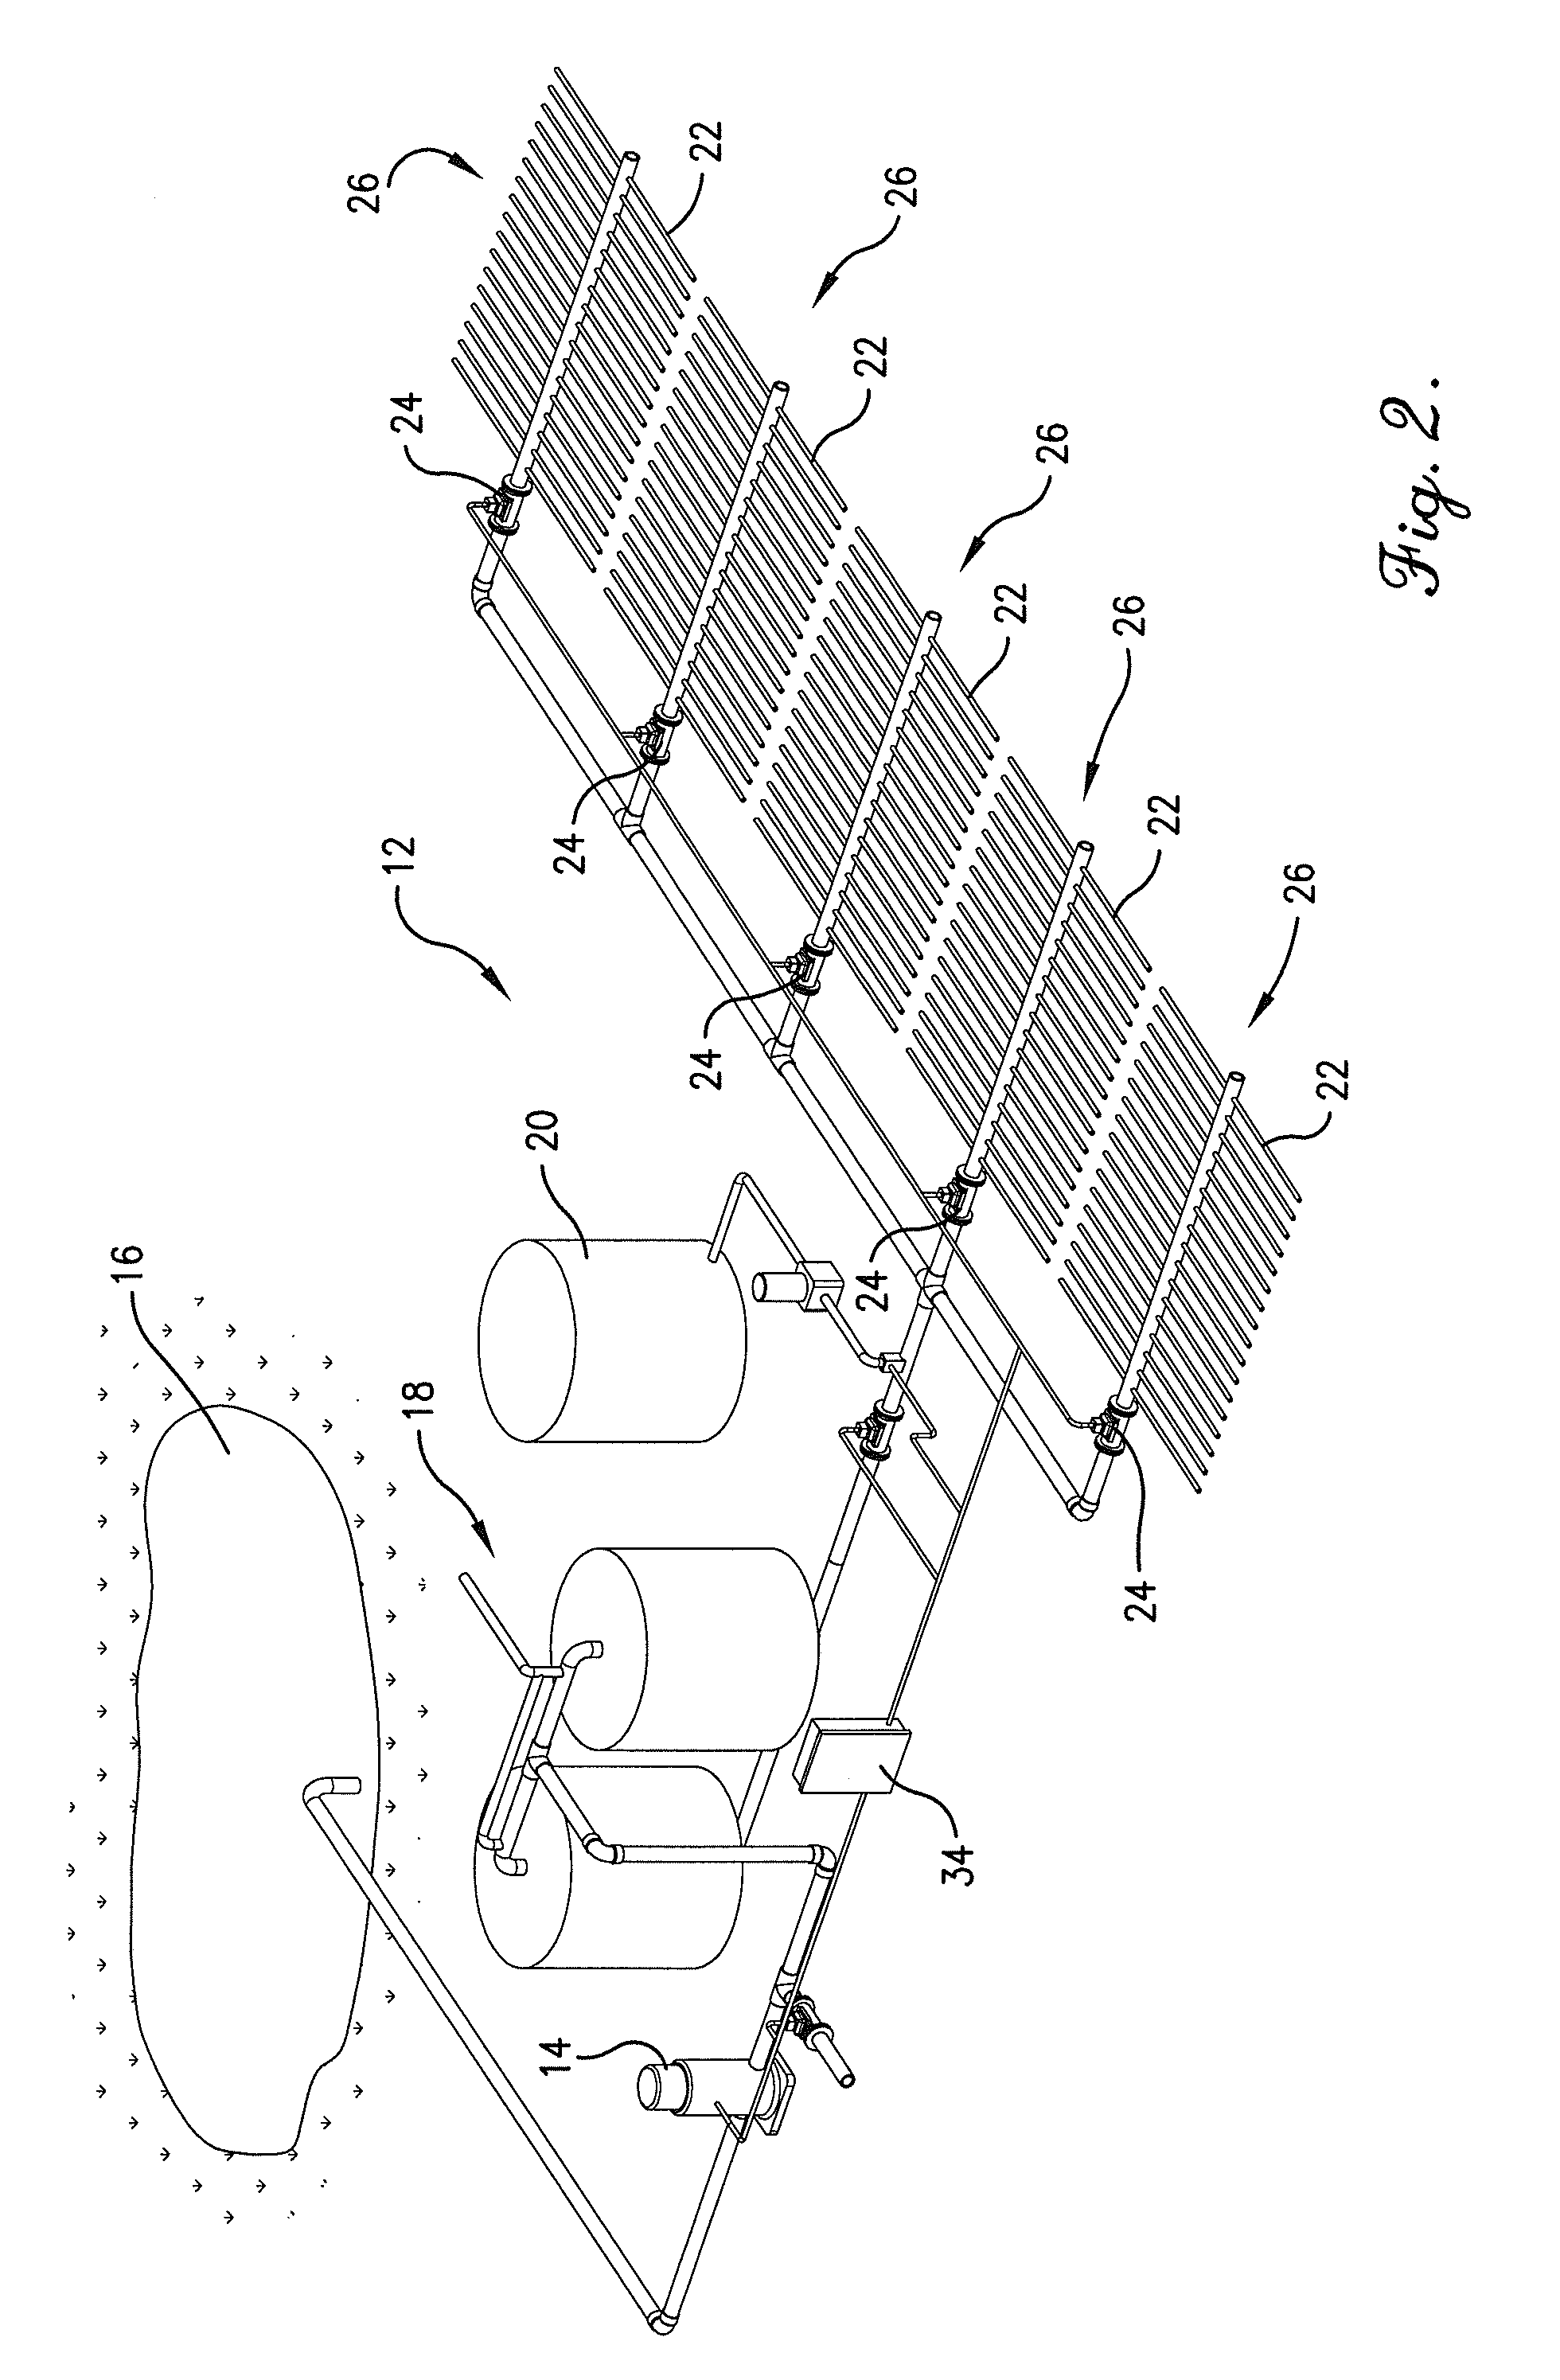 Control system for an irrigation system